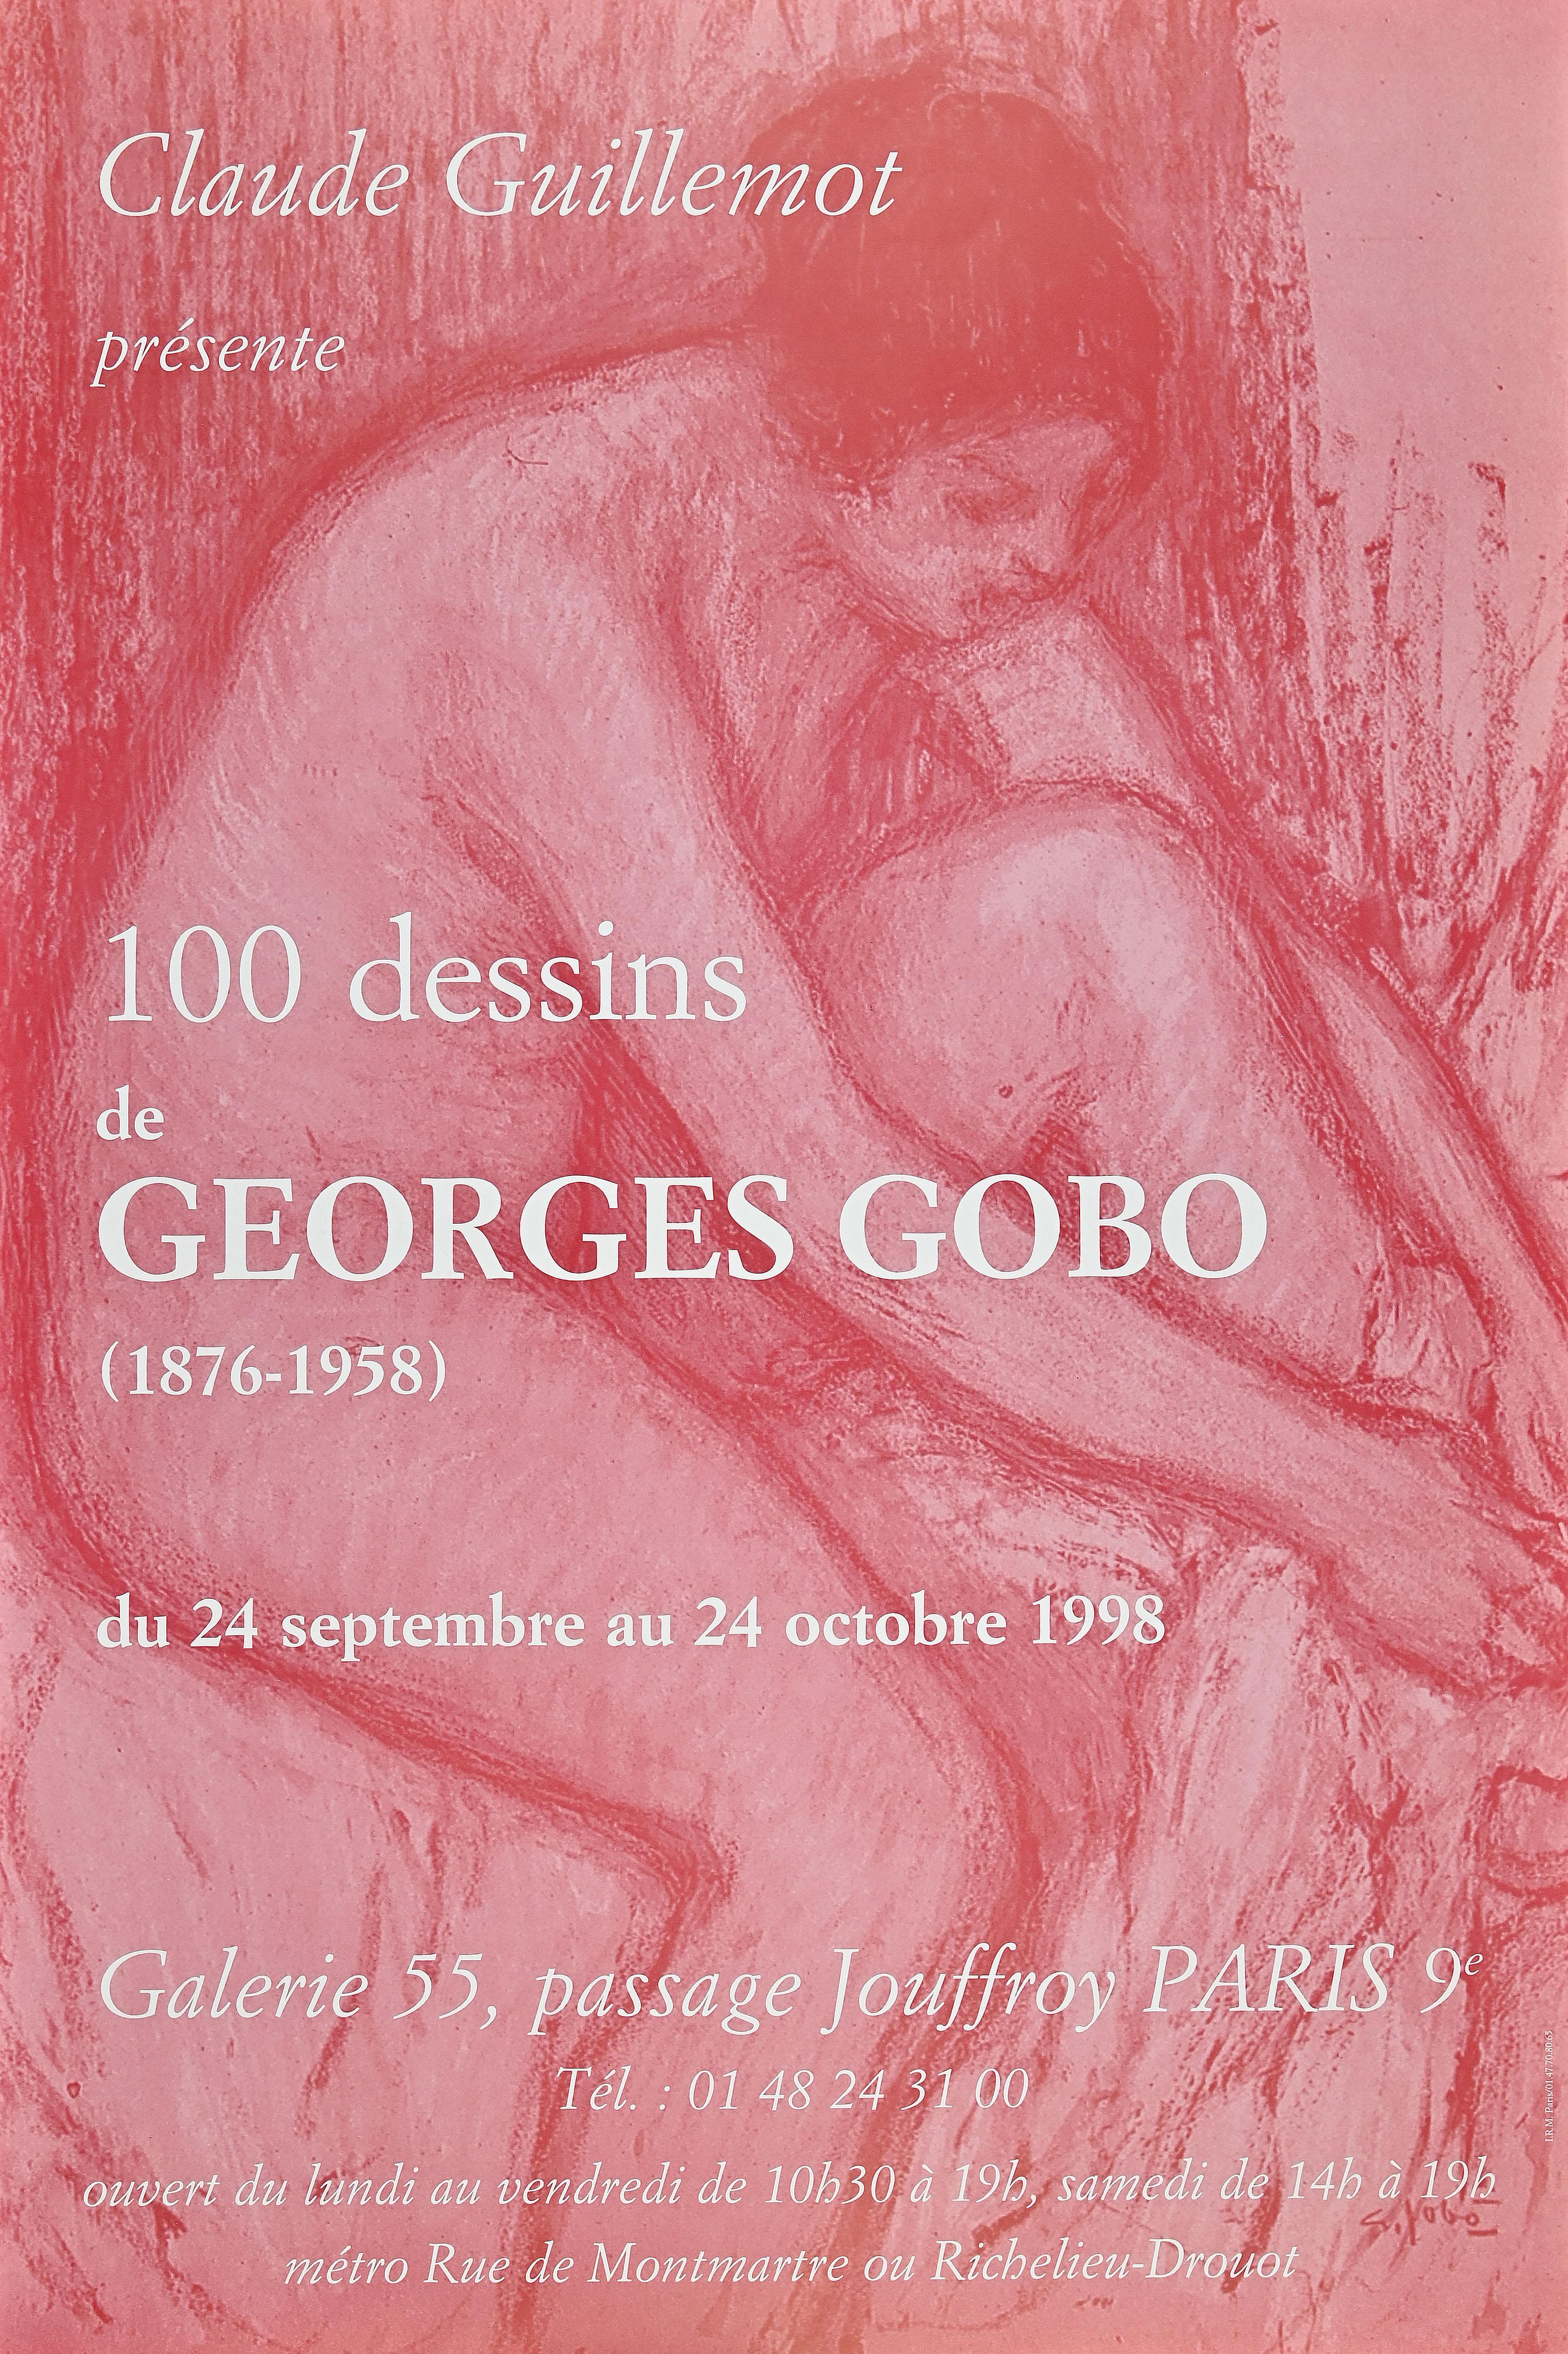 Georges Gobo Exhibition - Vintage Poster - 1998